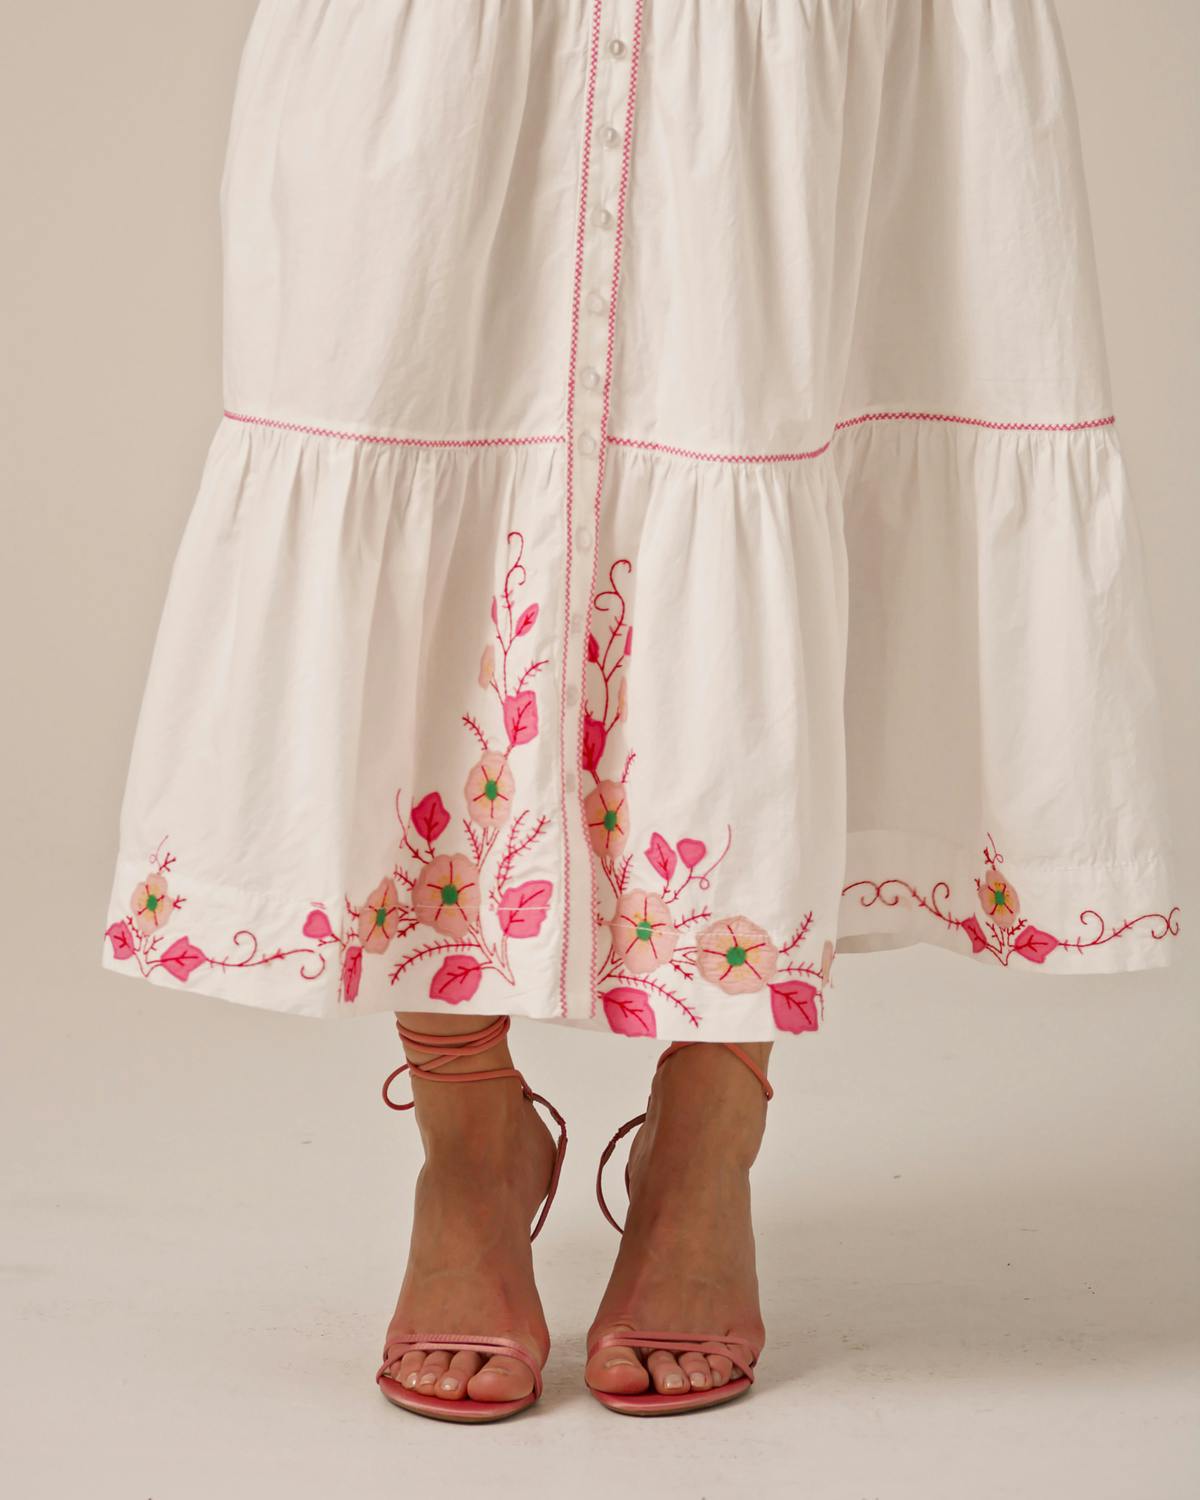 Poplin Embroidered Shirt Dress, White With Embroidery. Image #6